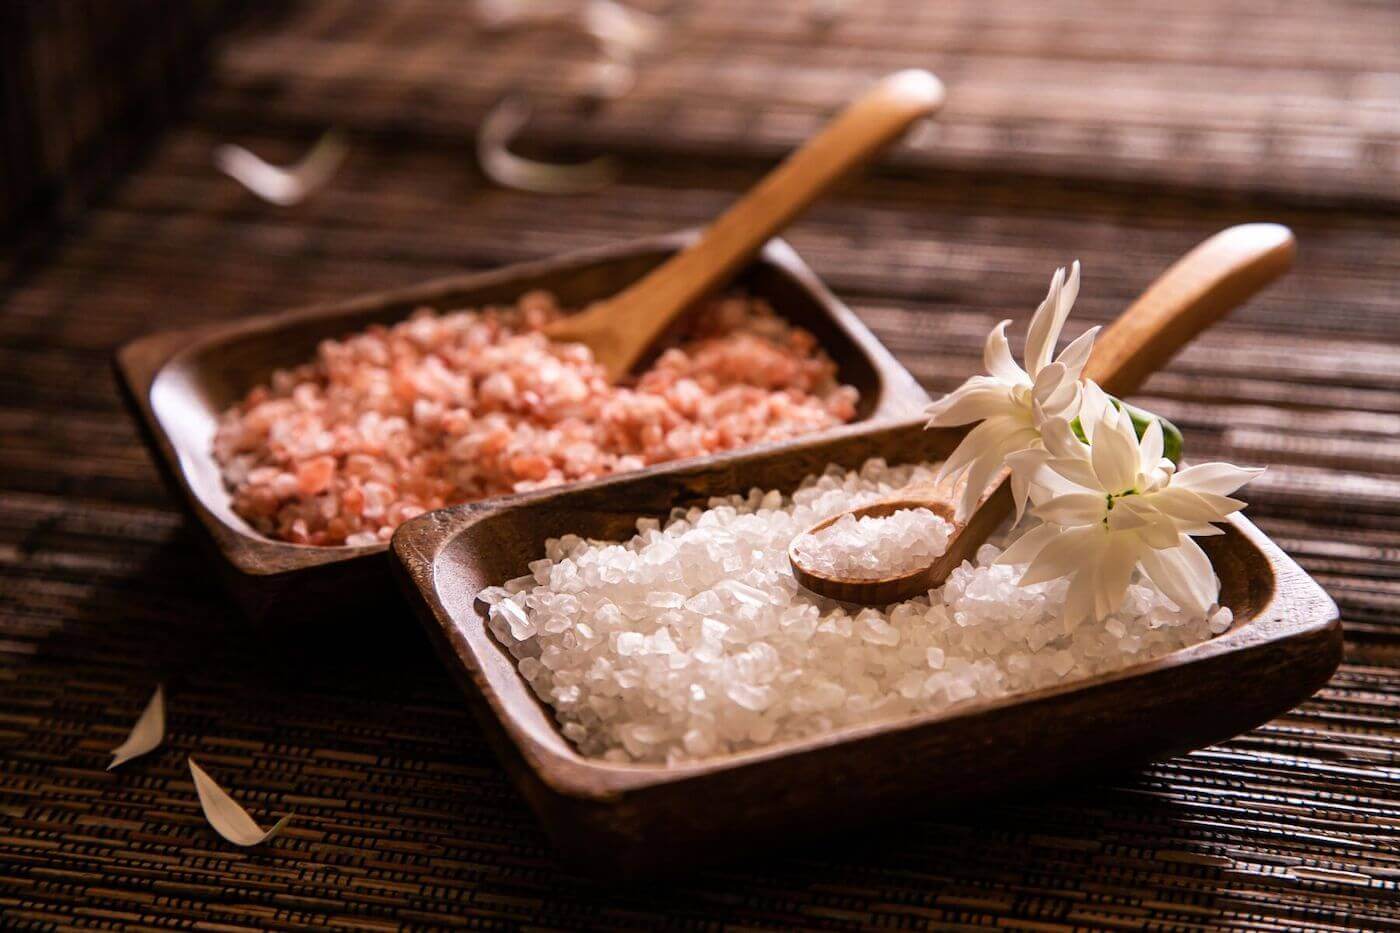 A pair of rectangular wooden bowls, one filled with coarse pink salt and another filled with coarse white salt.